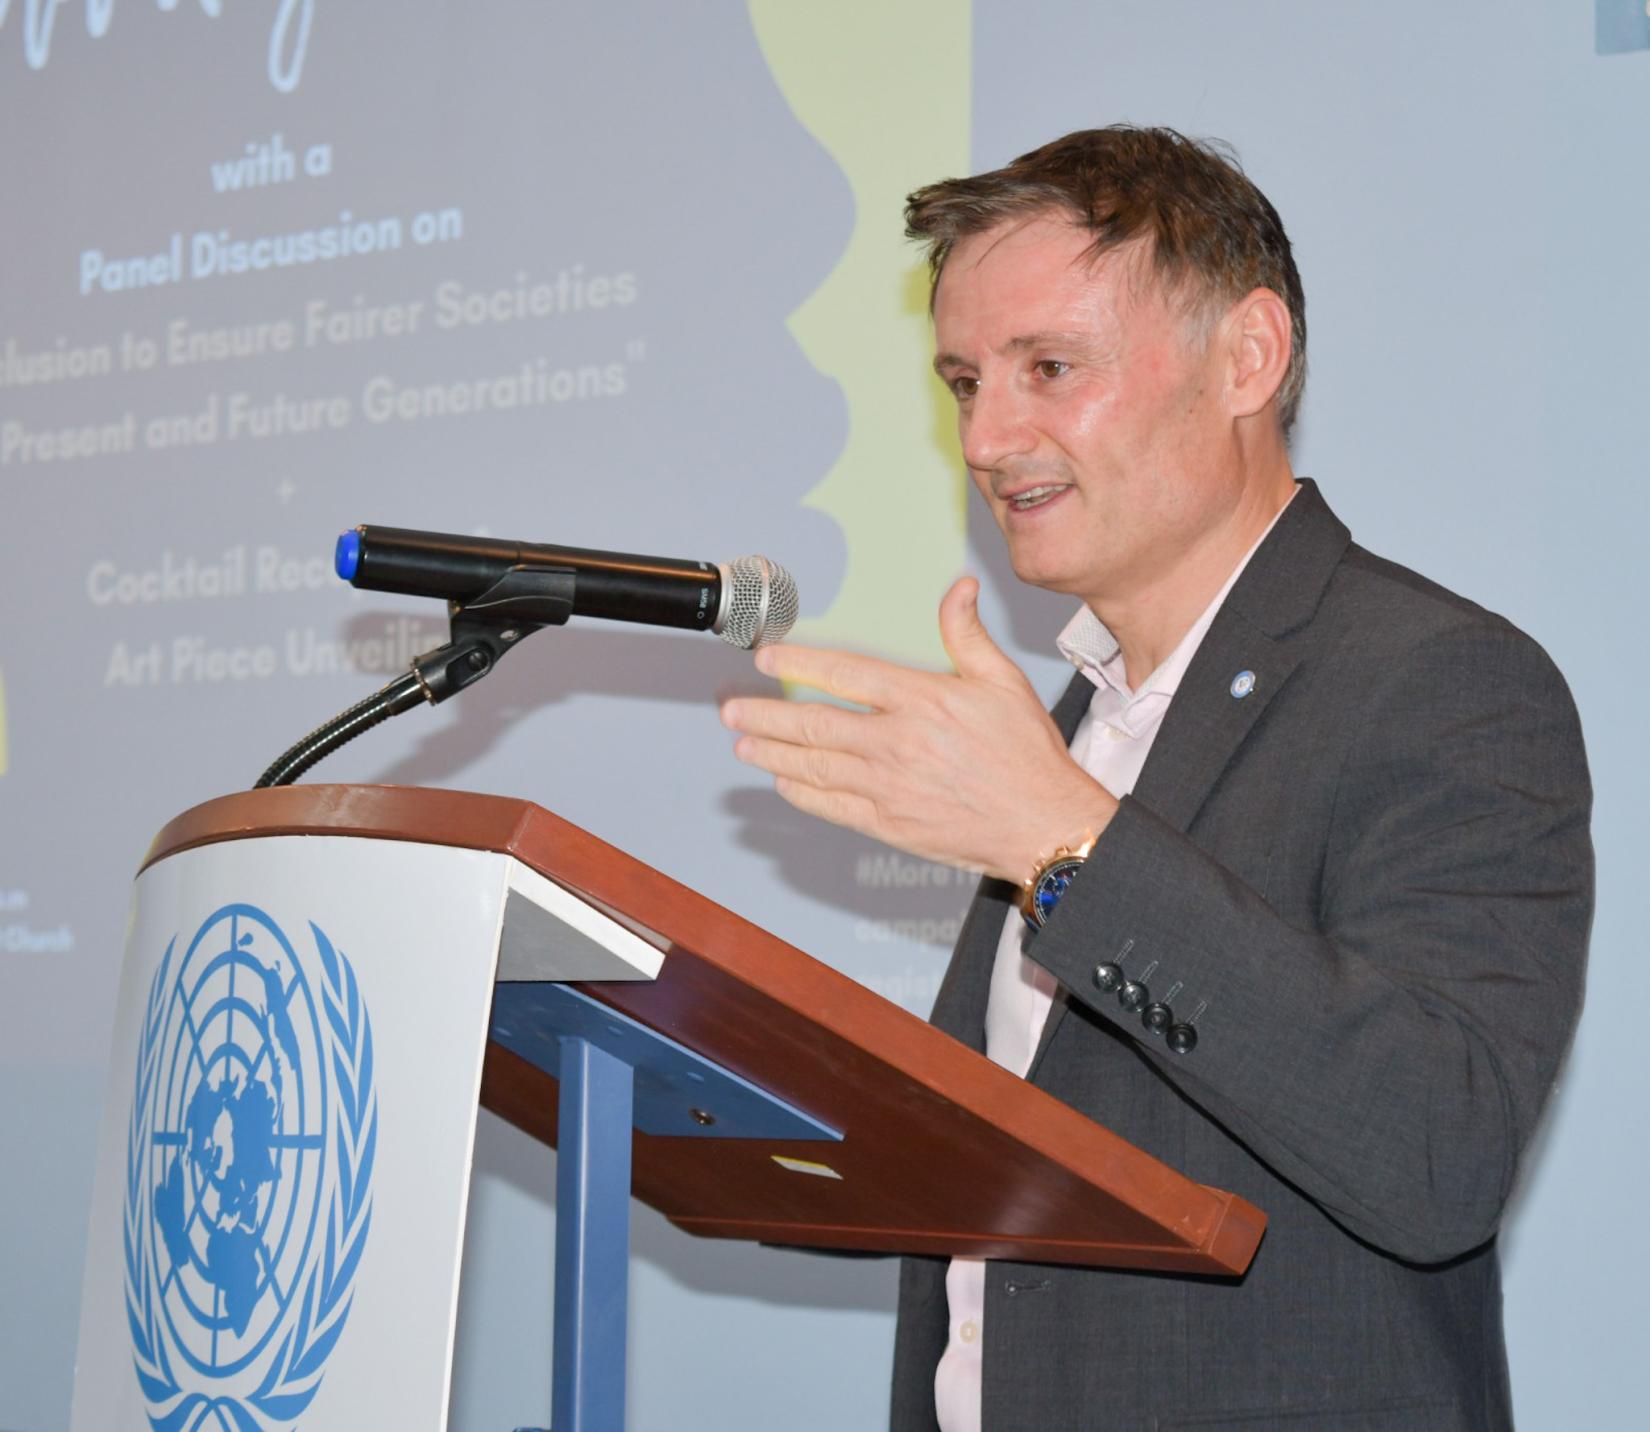 UN Resident Coordinator, Didier Trebucq stands at the UN podium on stage, delivering his remarks to the audience.